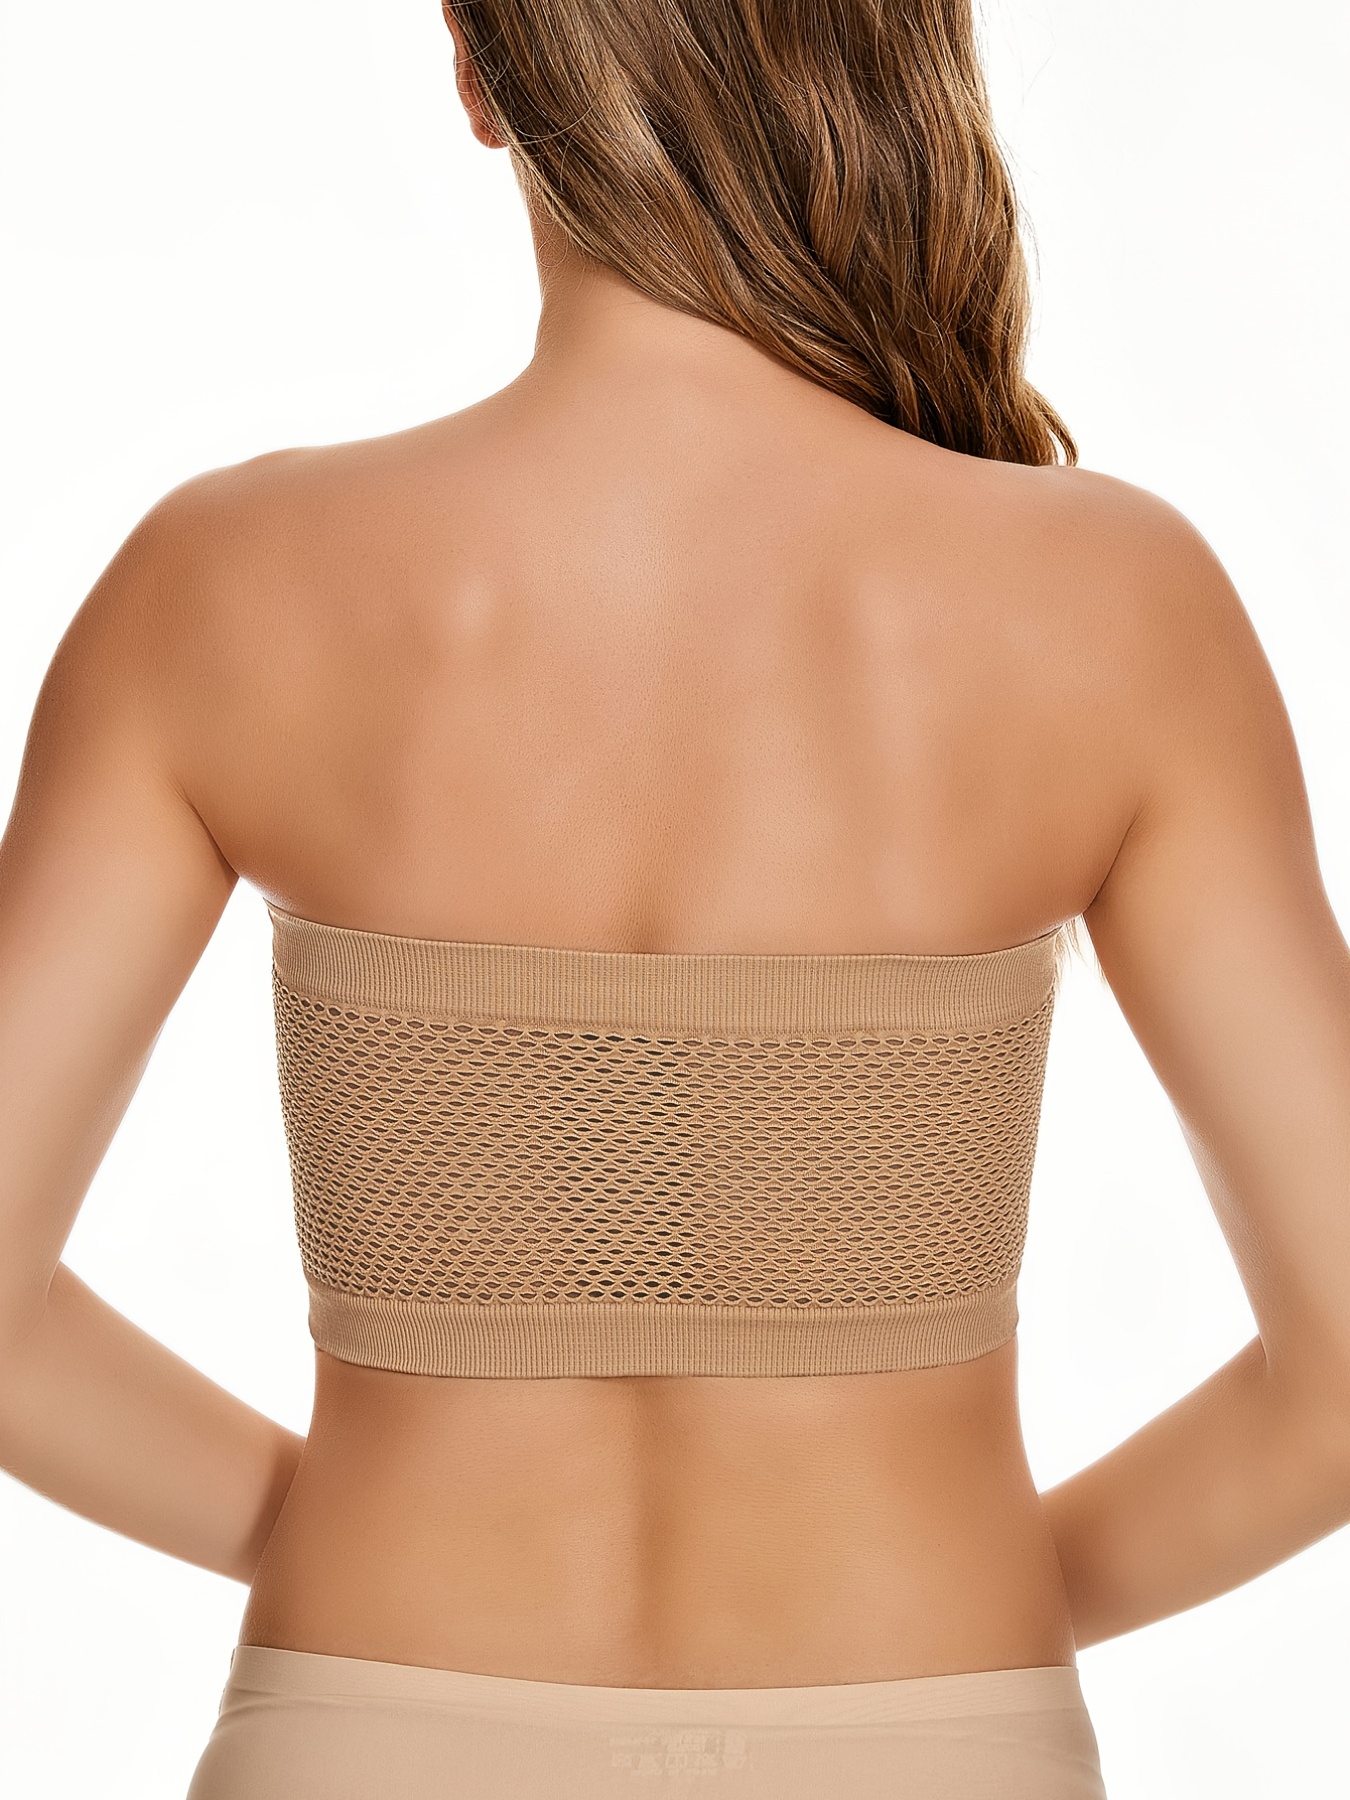 New Seamless Bandeau Bra Lingerie Without Straps Strapless Tube